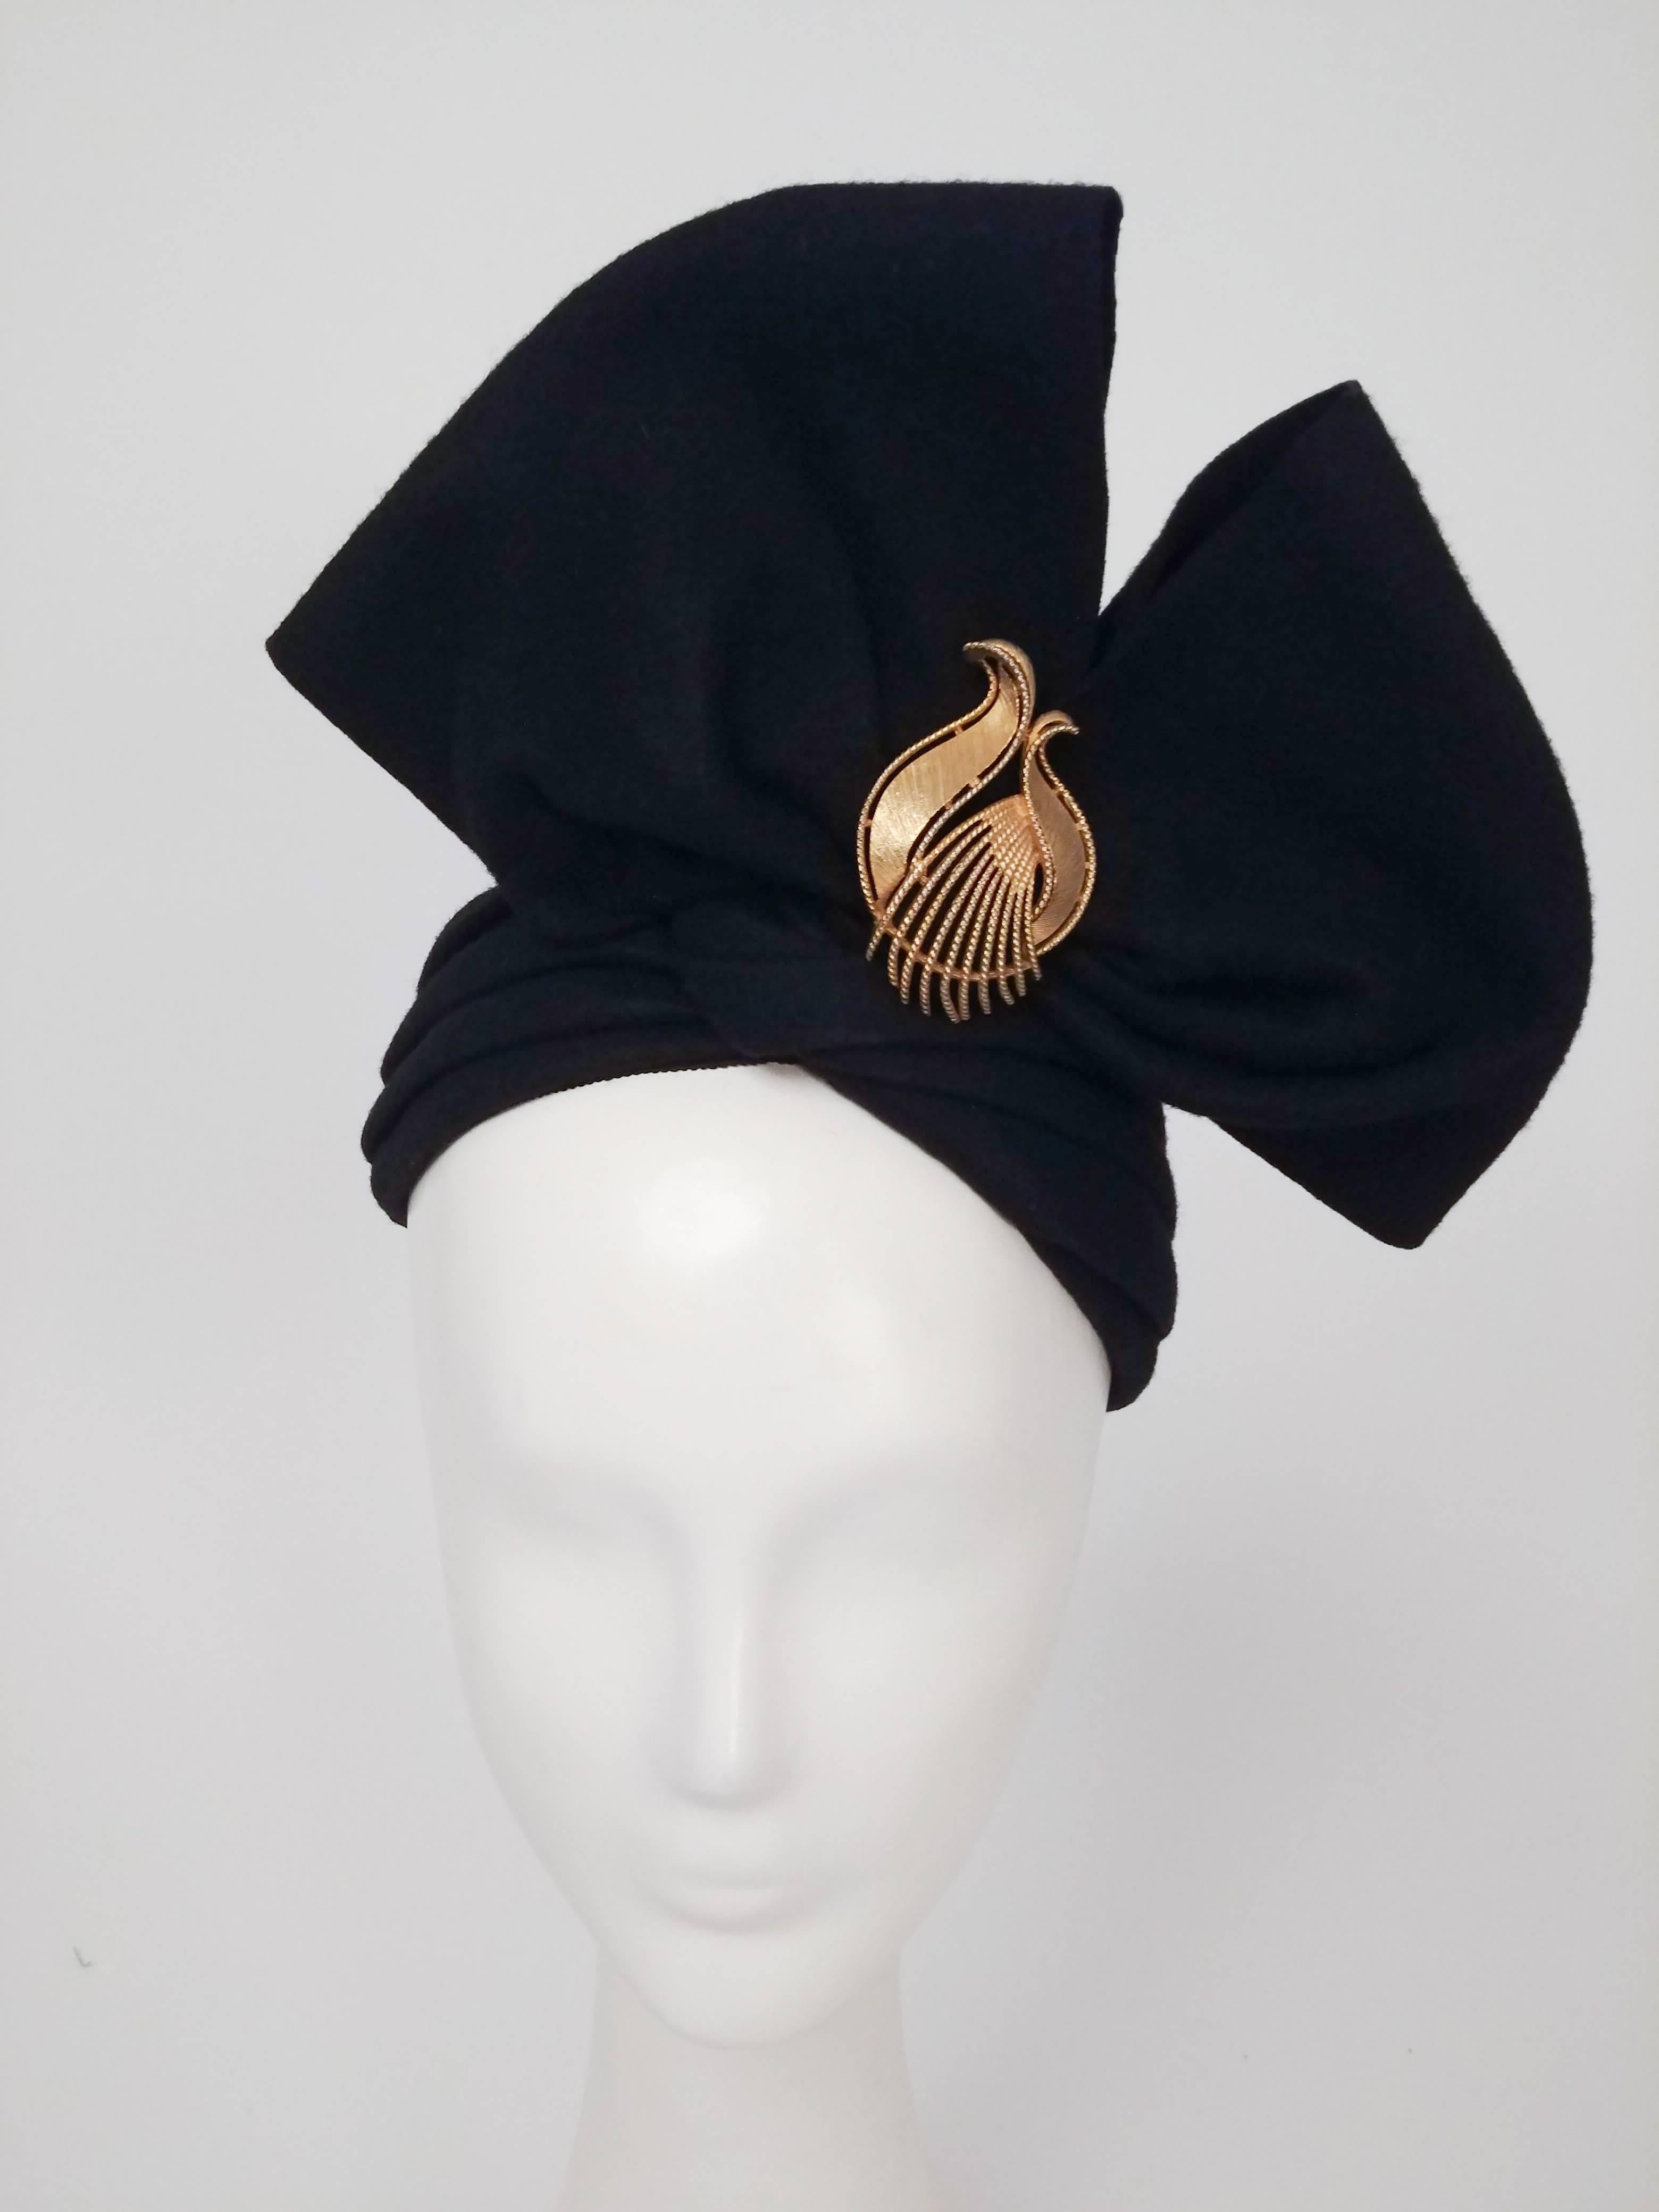 1960s Black Felt Structured Bow Hat. Artistic turban-like hat perches towards back of head with large structured bow, finished with gold-tone decorative brooch. 